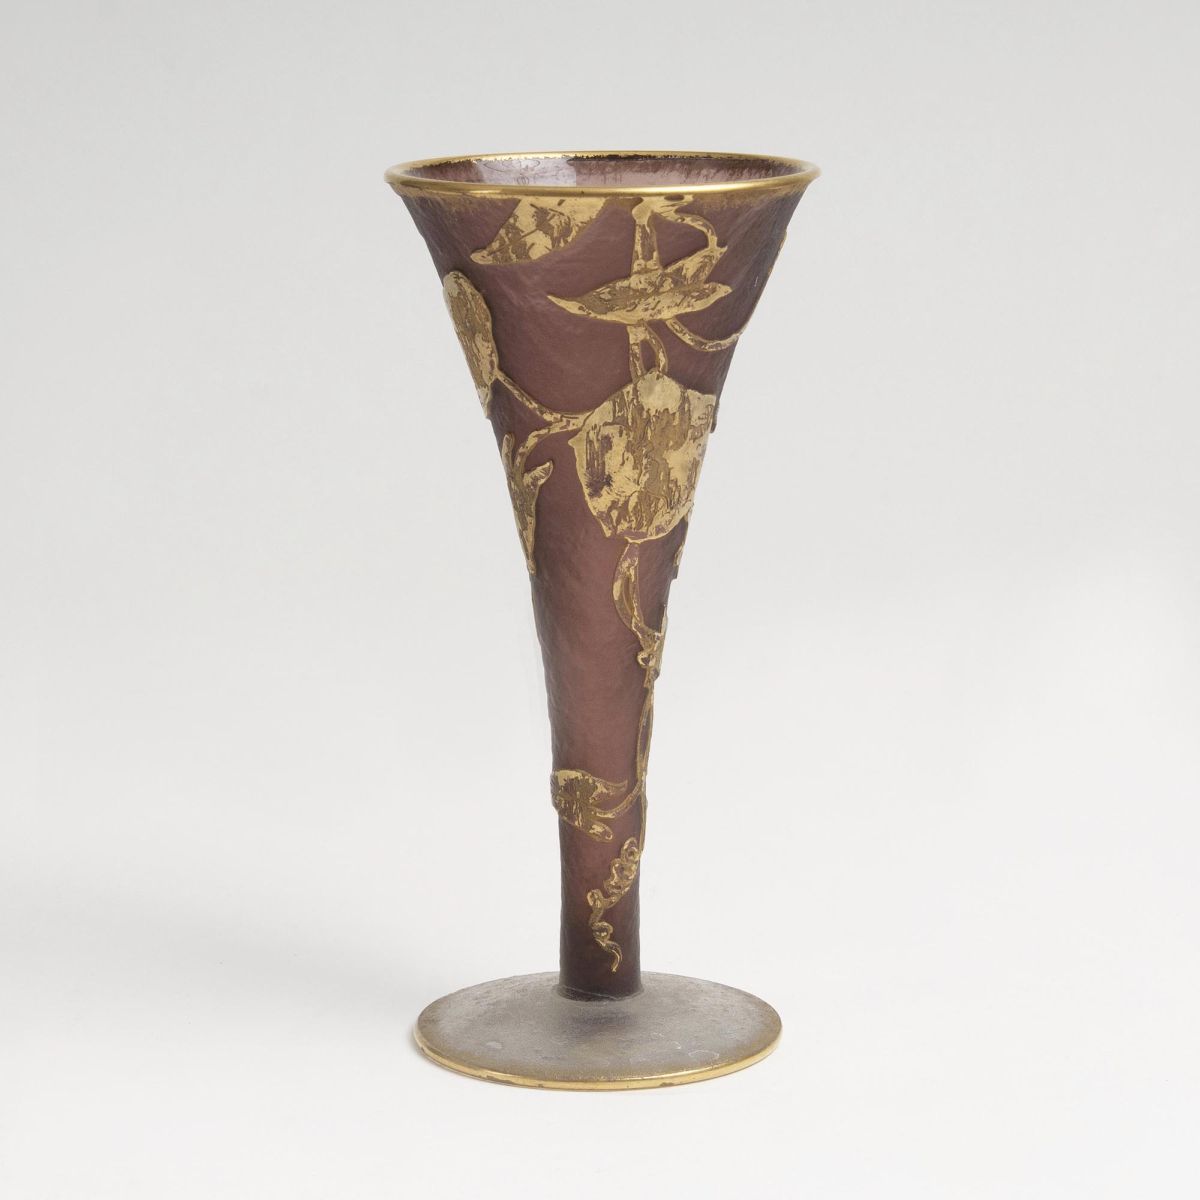 A Small Chalice Vase with Clematis